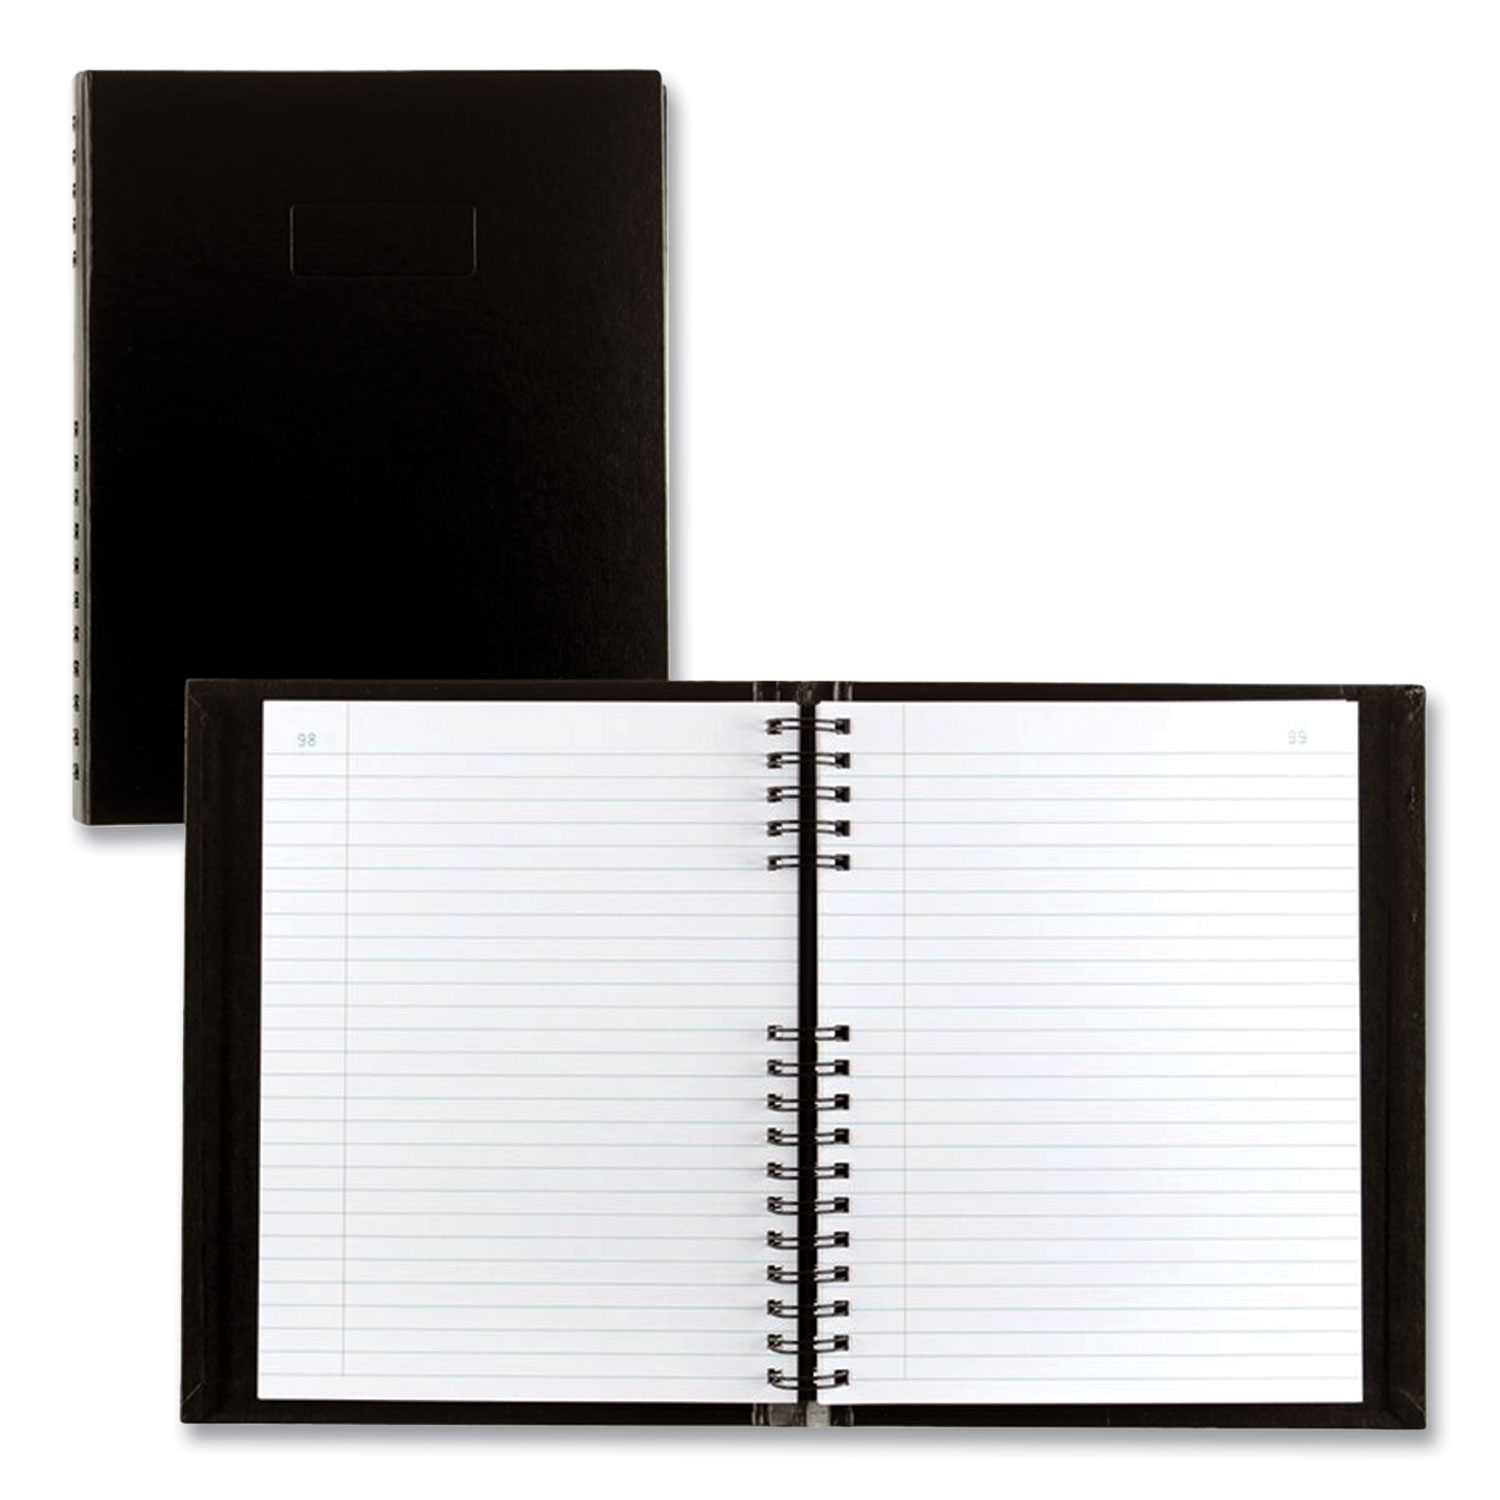  Blueline A7963C.01 AccountPro Records Register Book, Black Cover, 7.69 x 10.25, 300 White Pages (RED564941) 